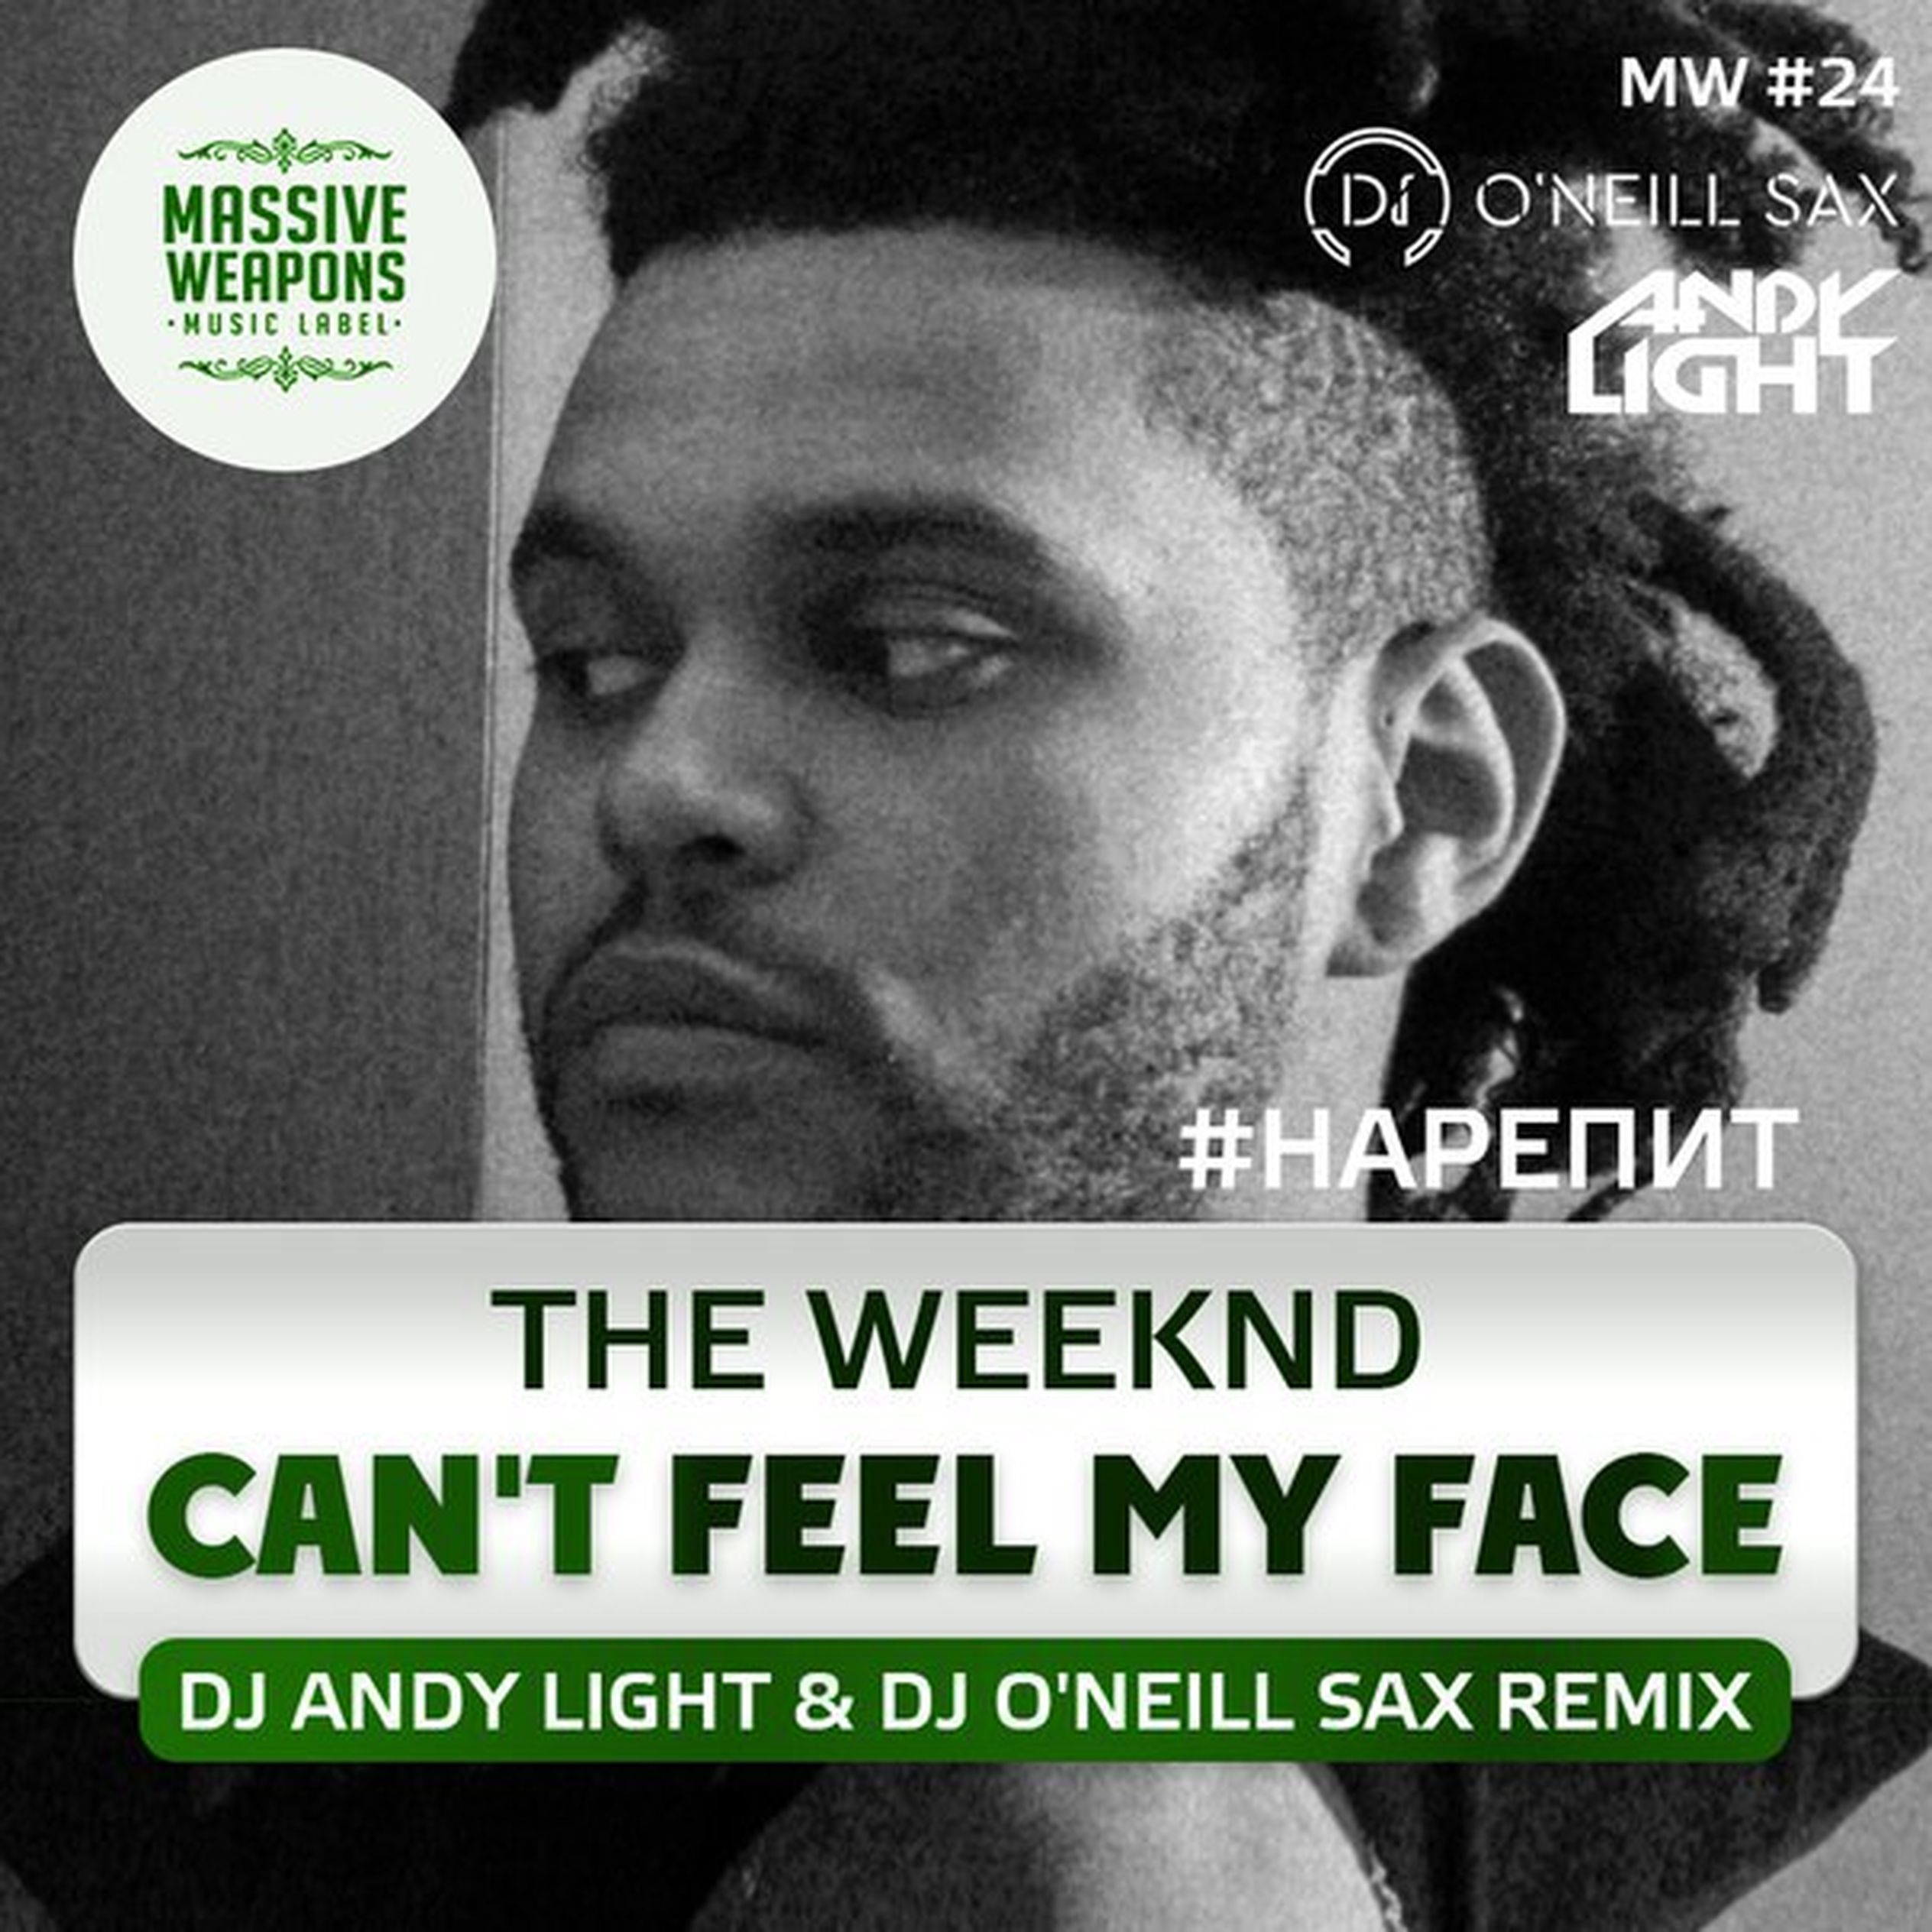 Can t feel my face the weeknd